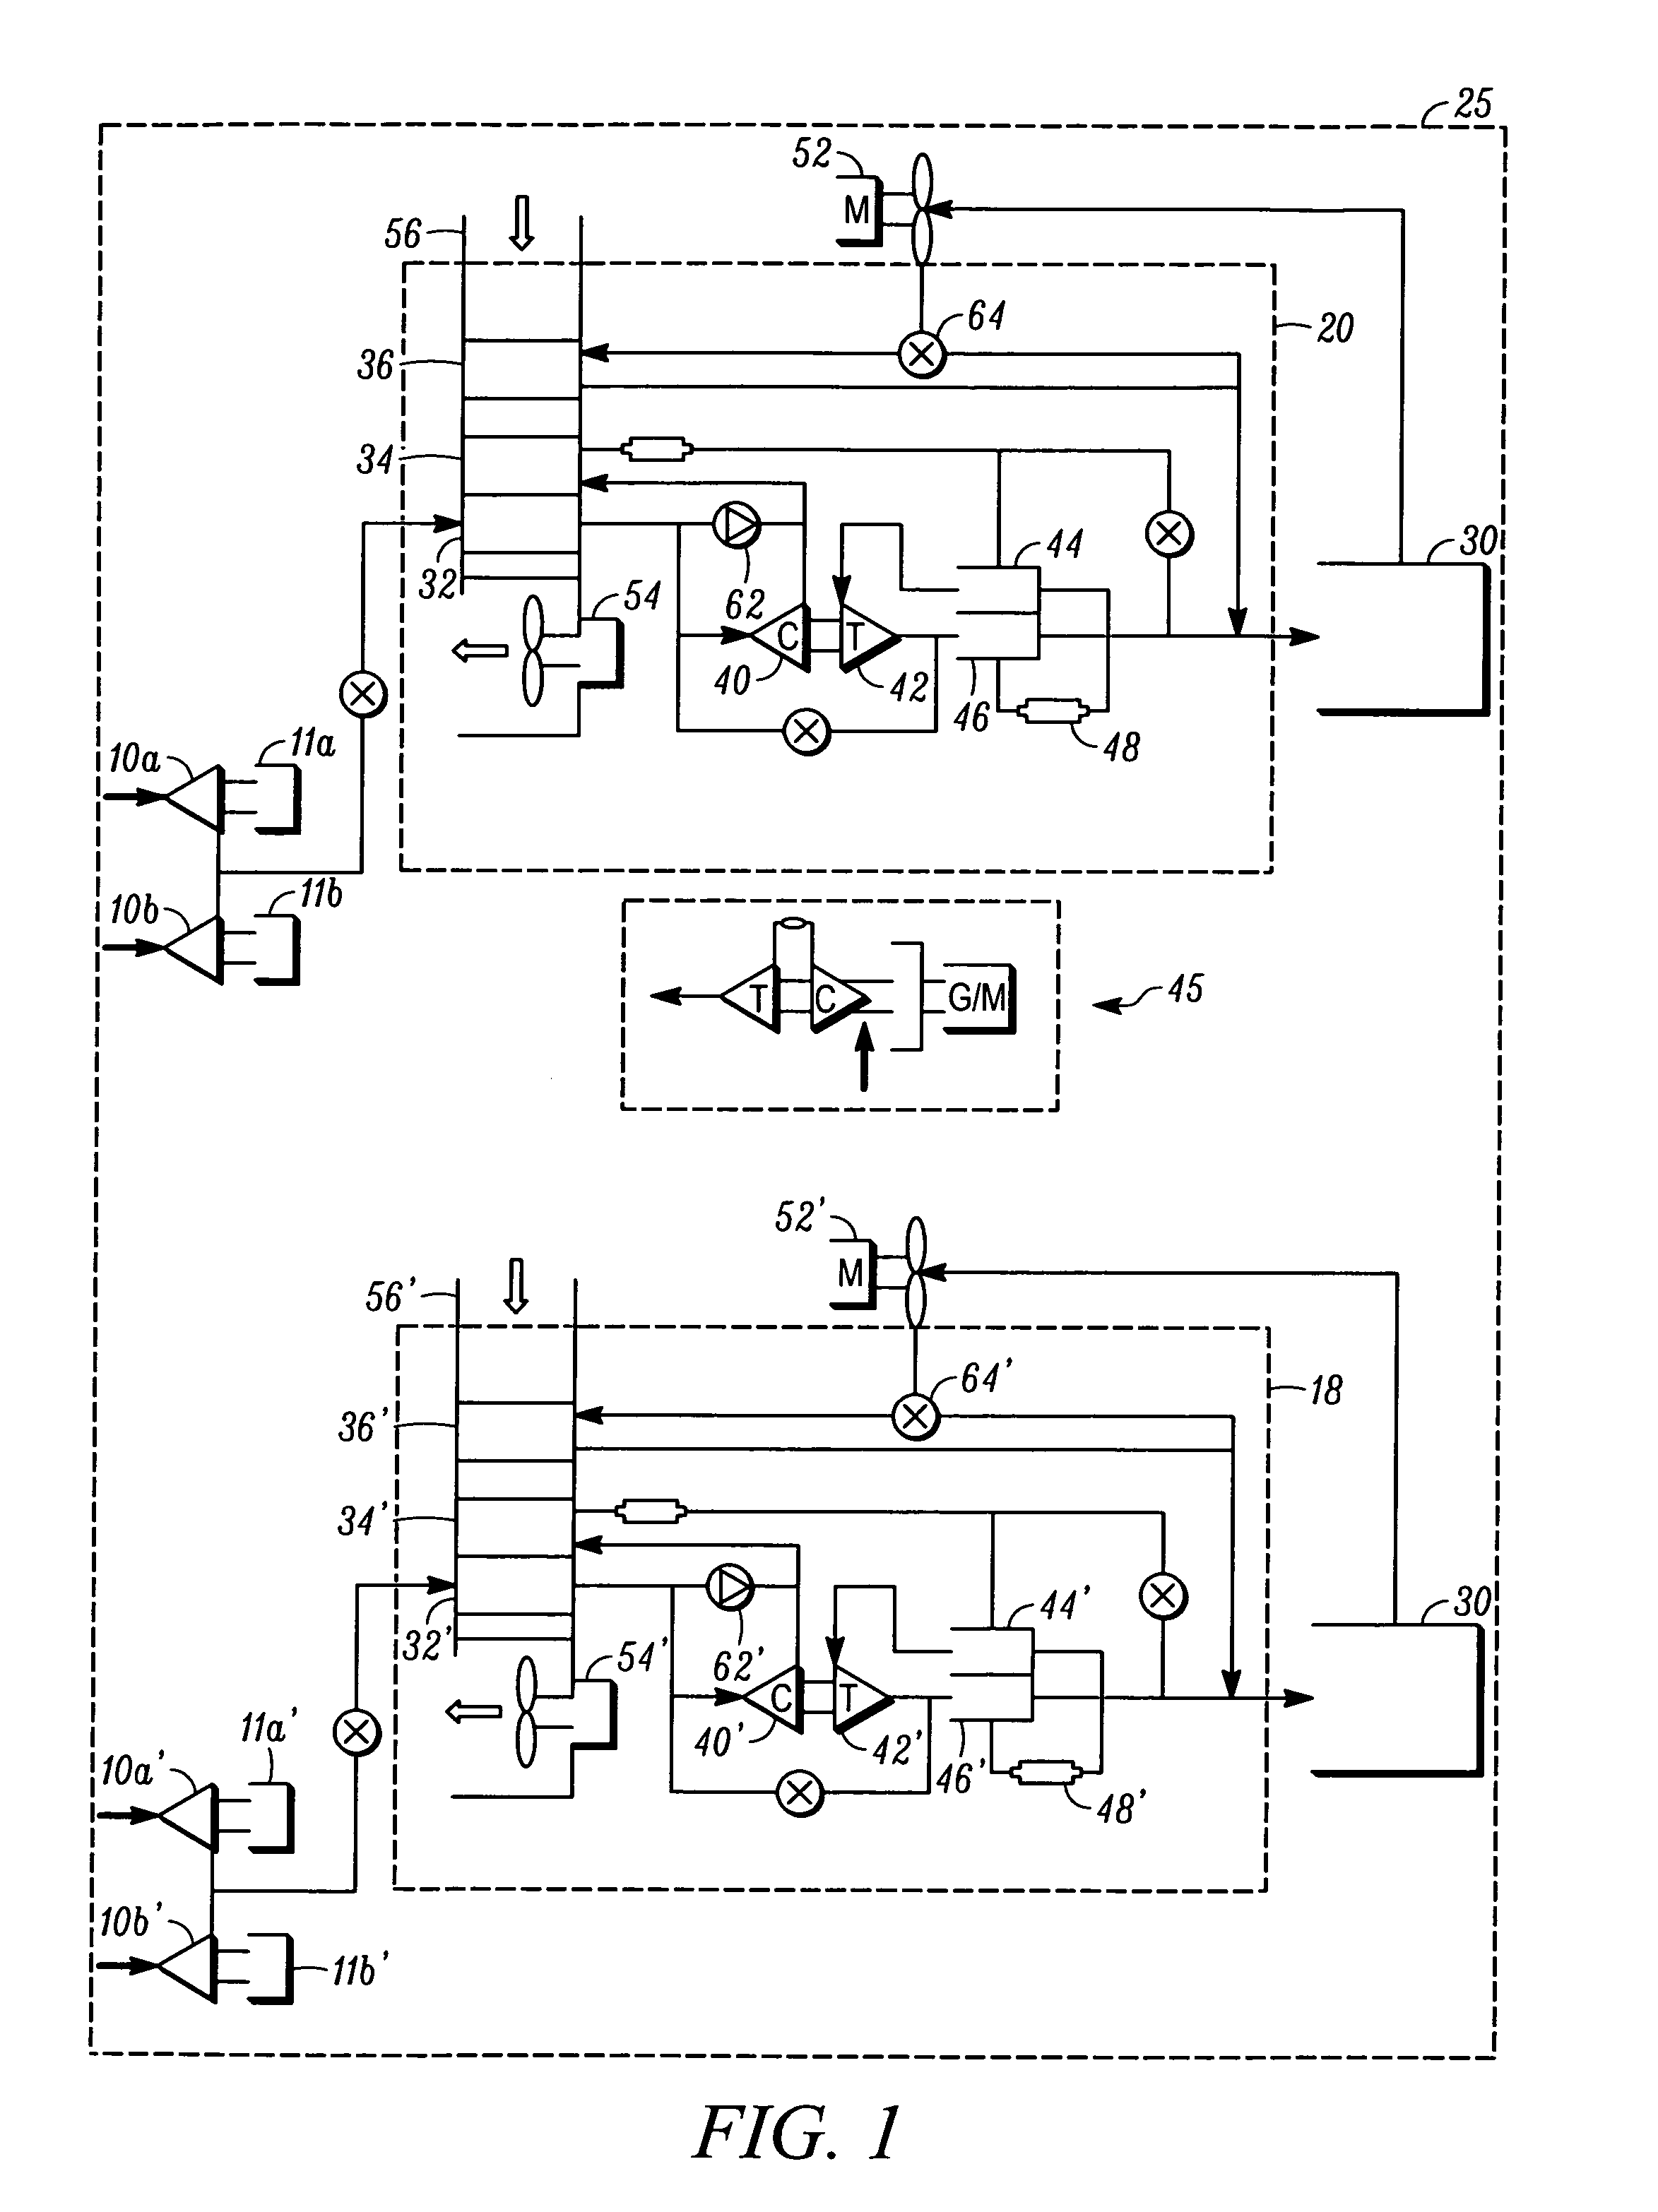 Integrated environmental control and auxiliary power system for an aircraft